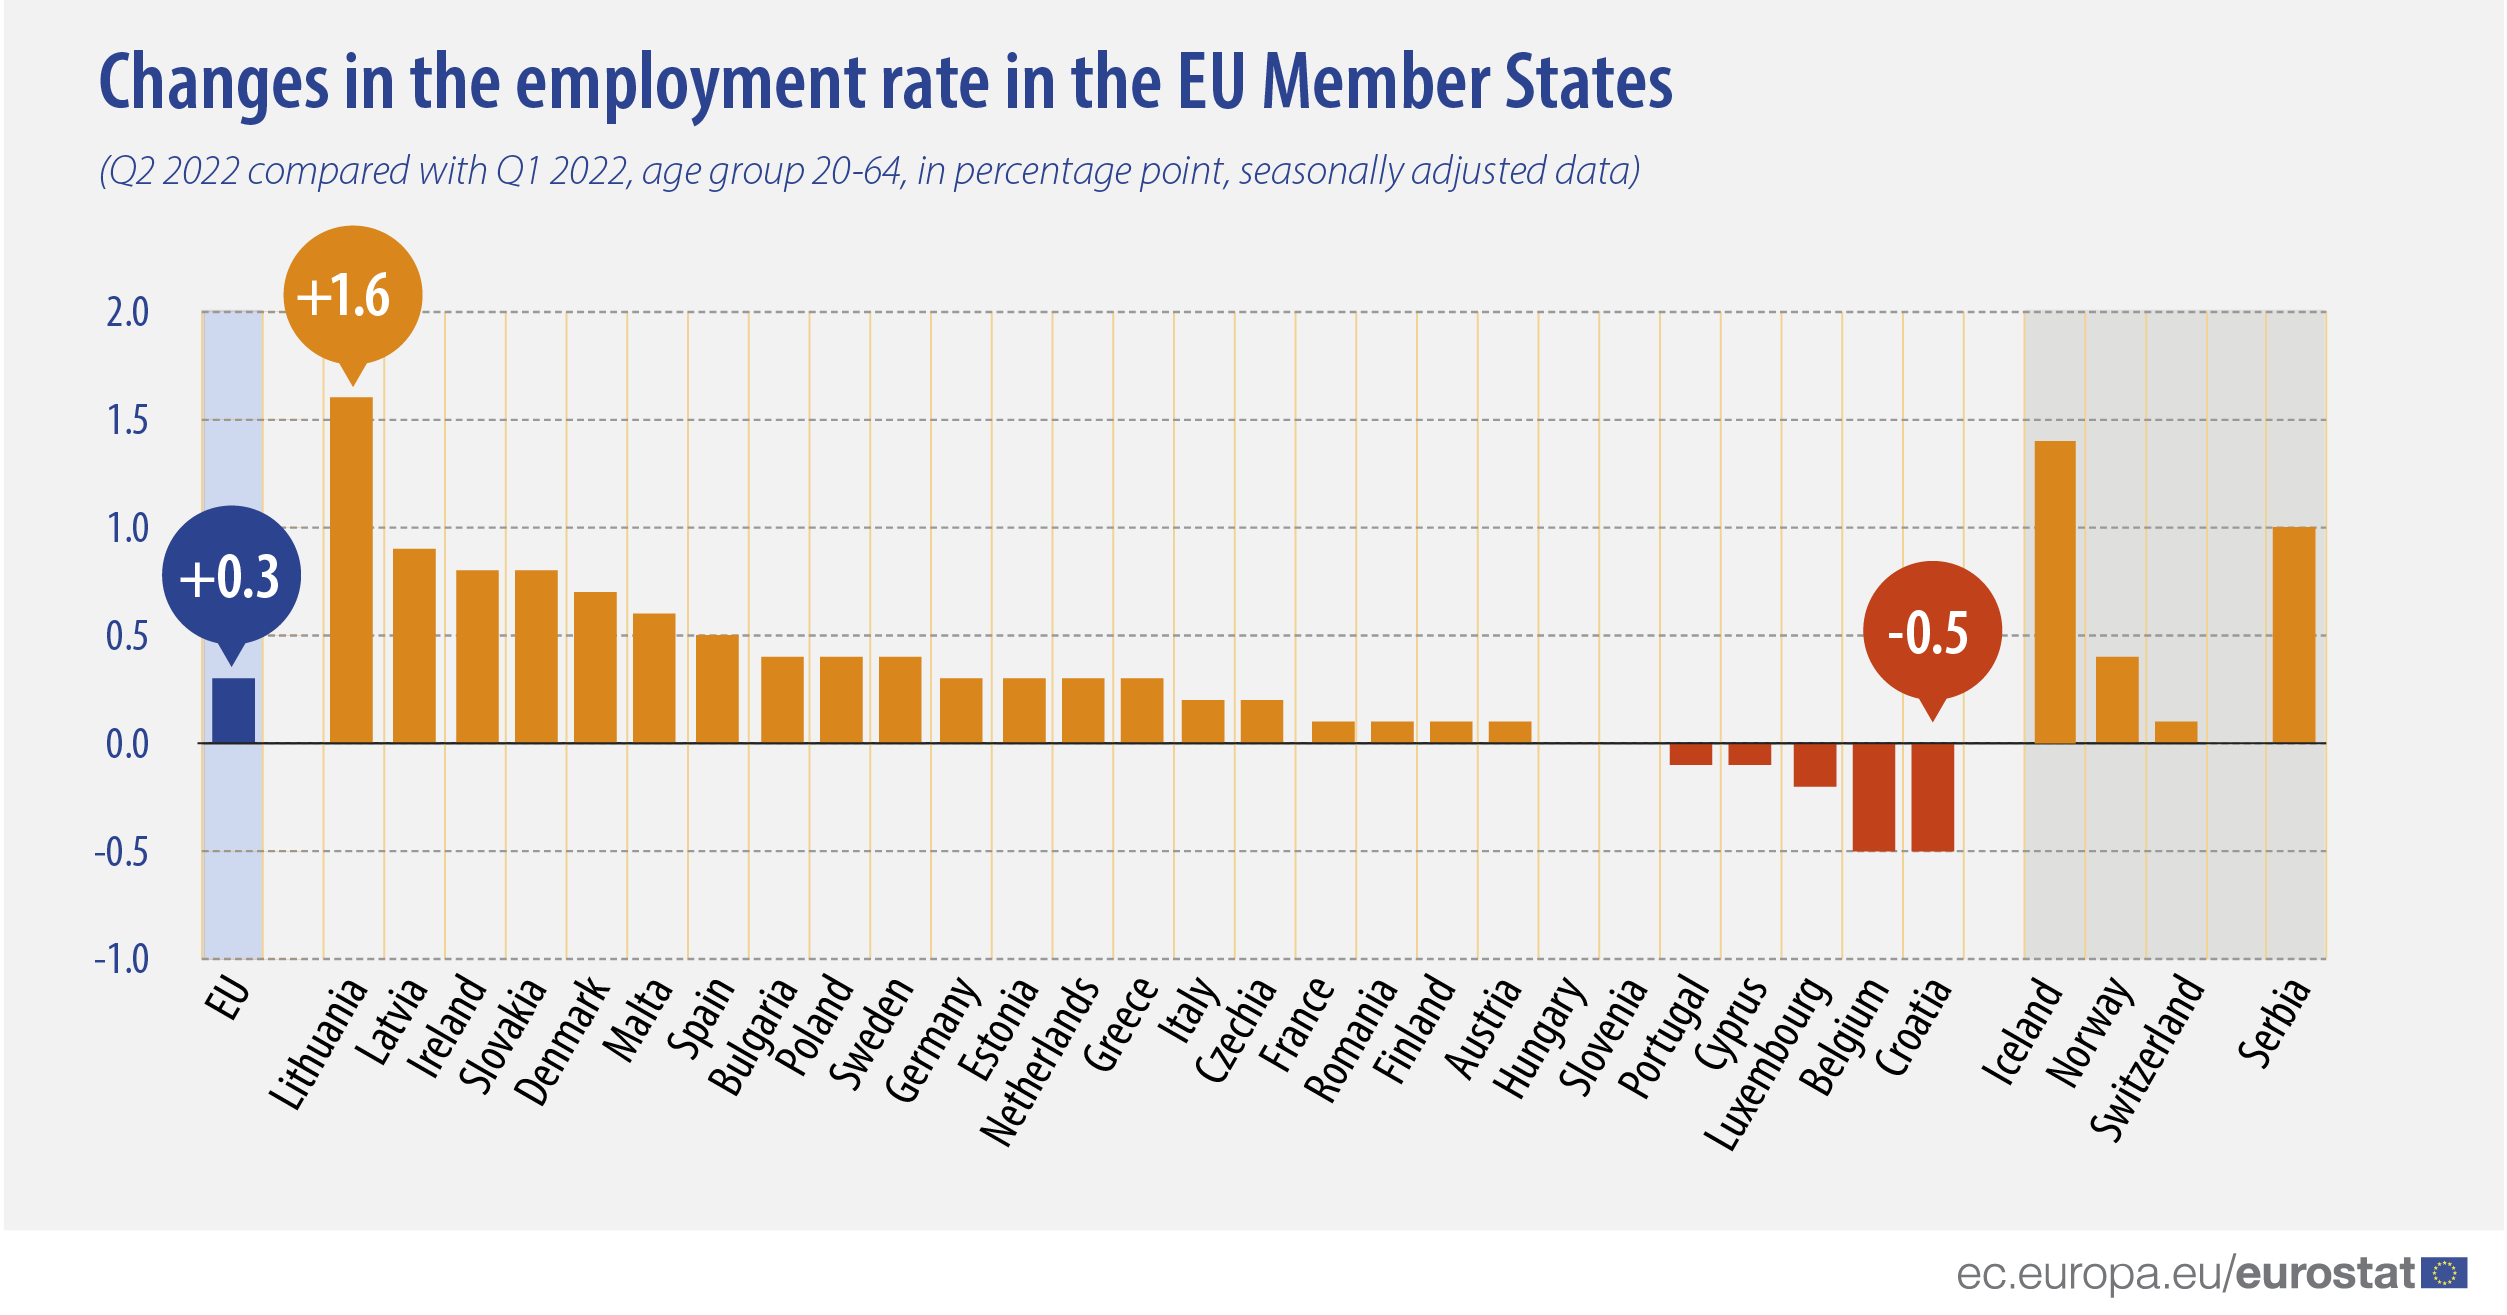 Bar chart: Changes in the employment rate in the EU Member States, age group 20-64, in percentage point, seasonally adjusted data, Q2 2022 compared with Q1 2022